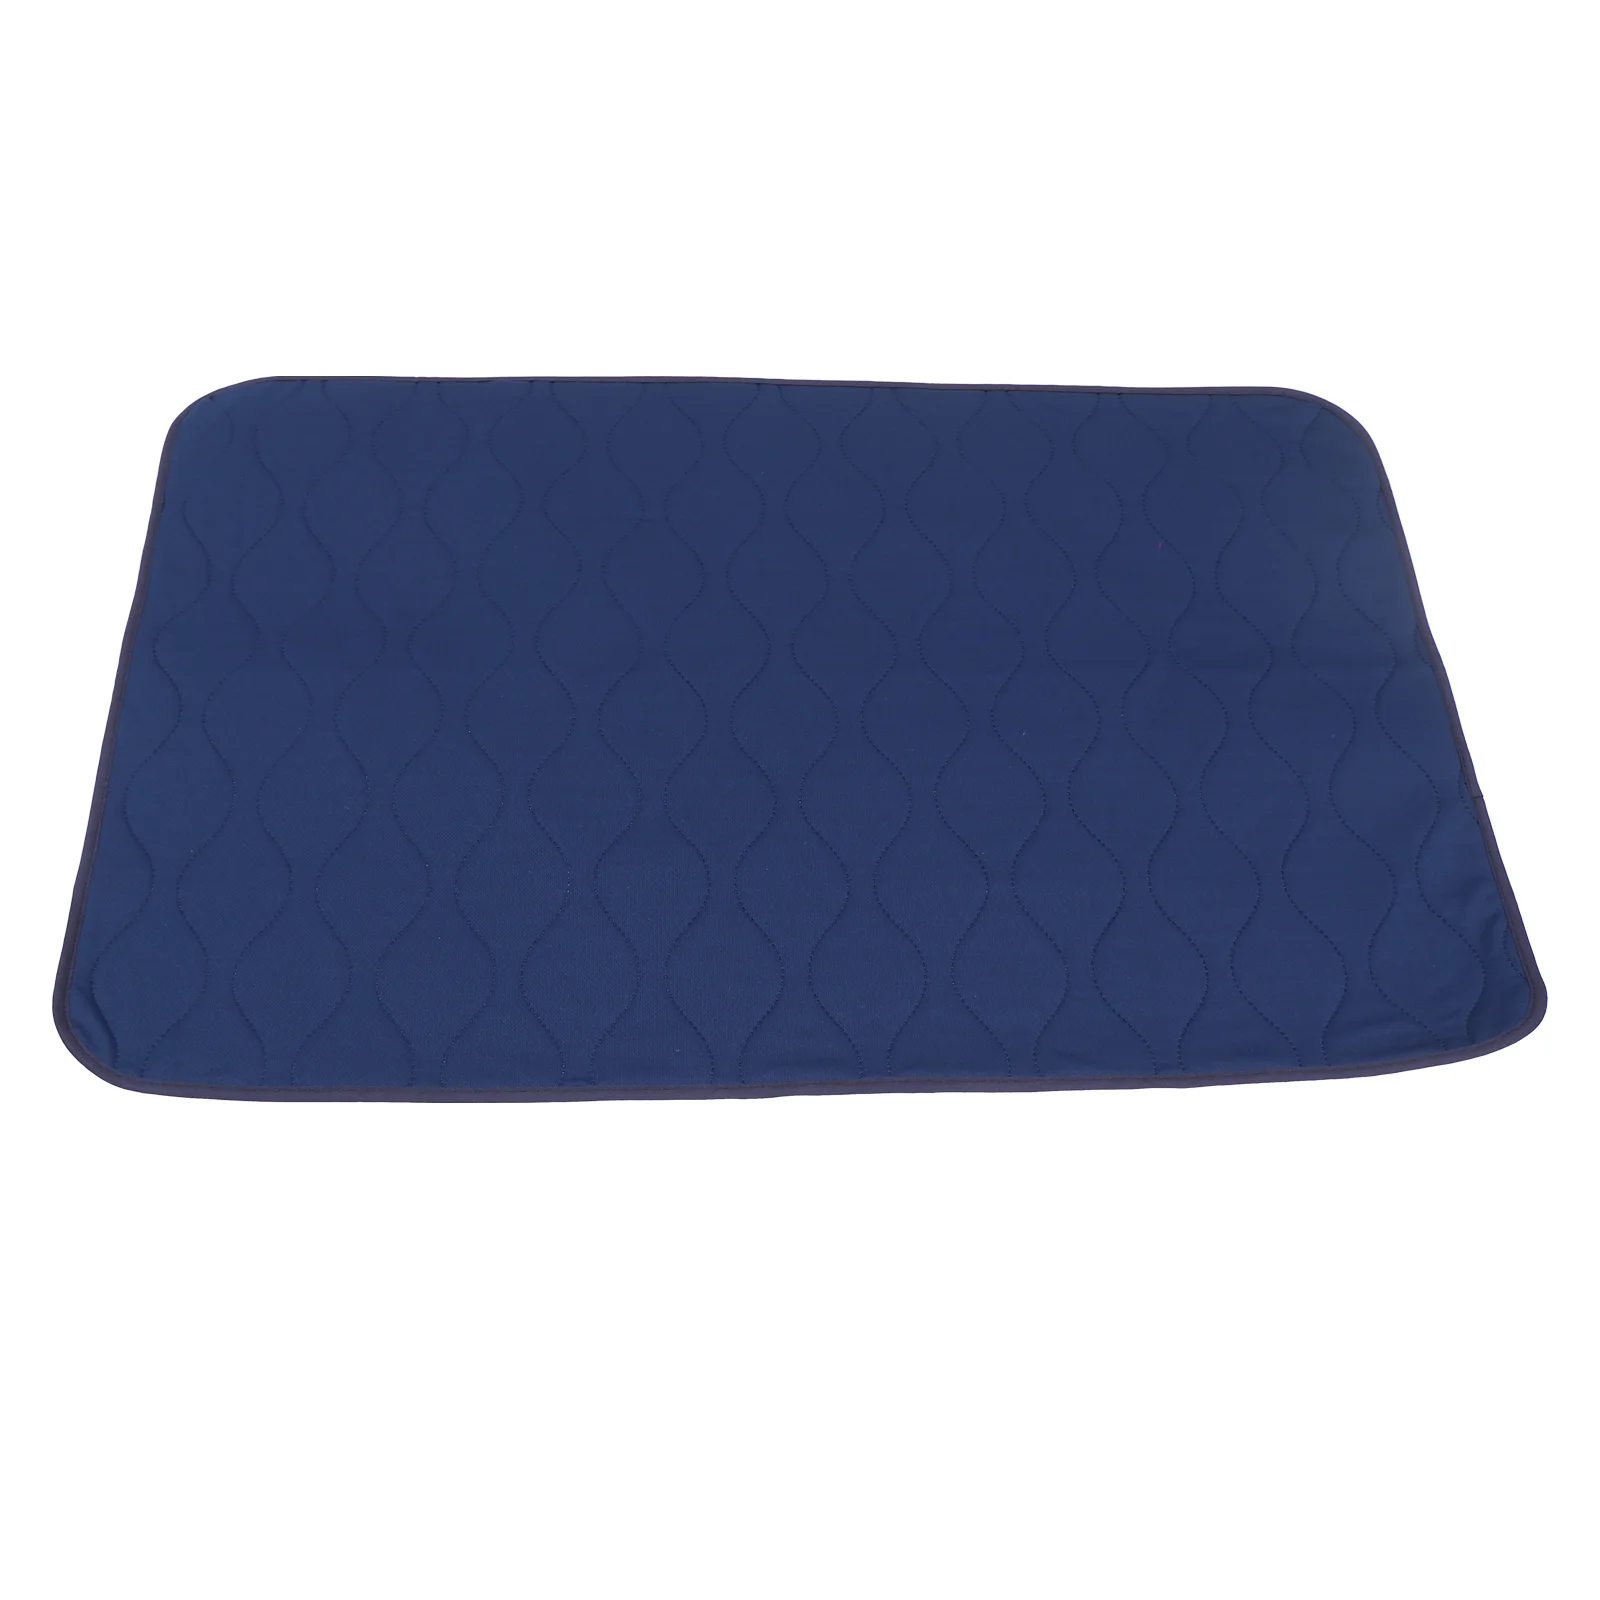 

Absorbent Washable Incontinence Chair Pad Reusable and Leakproof Lining for Spills and Fluids Hygienic Changing Mat